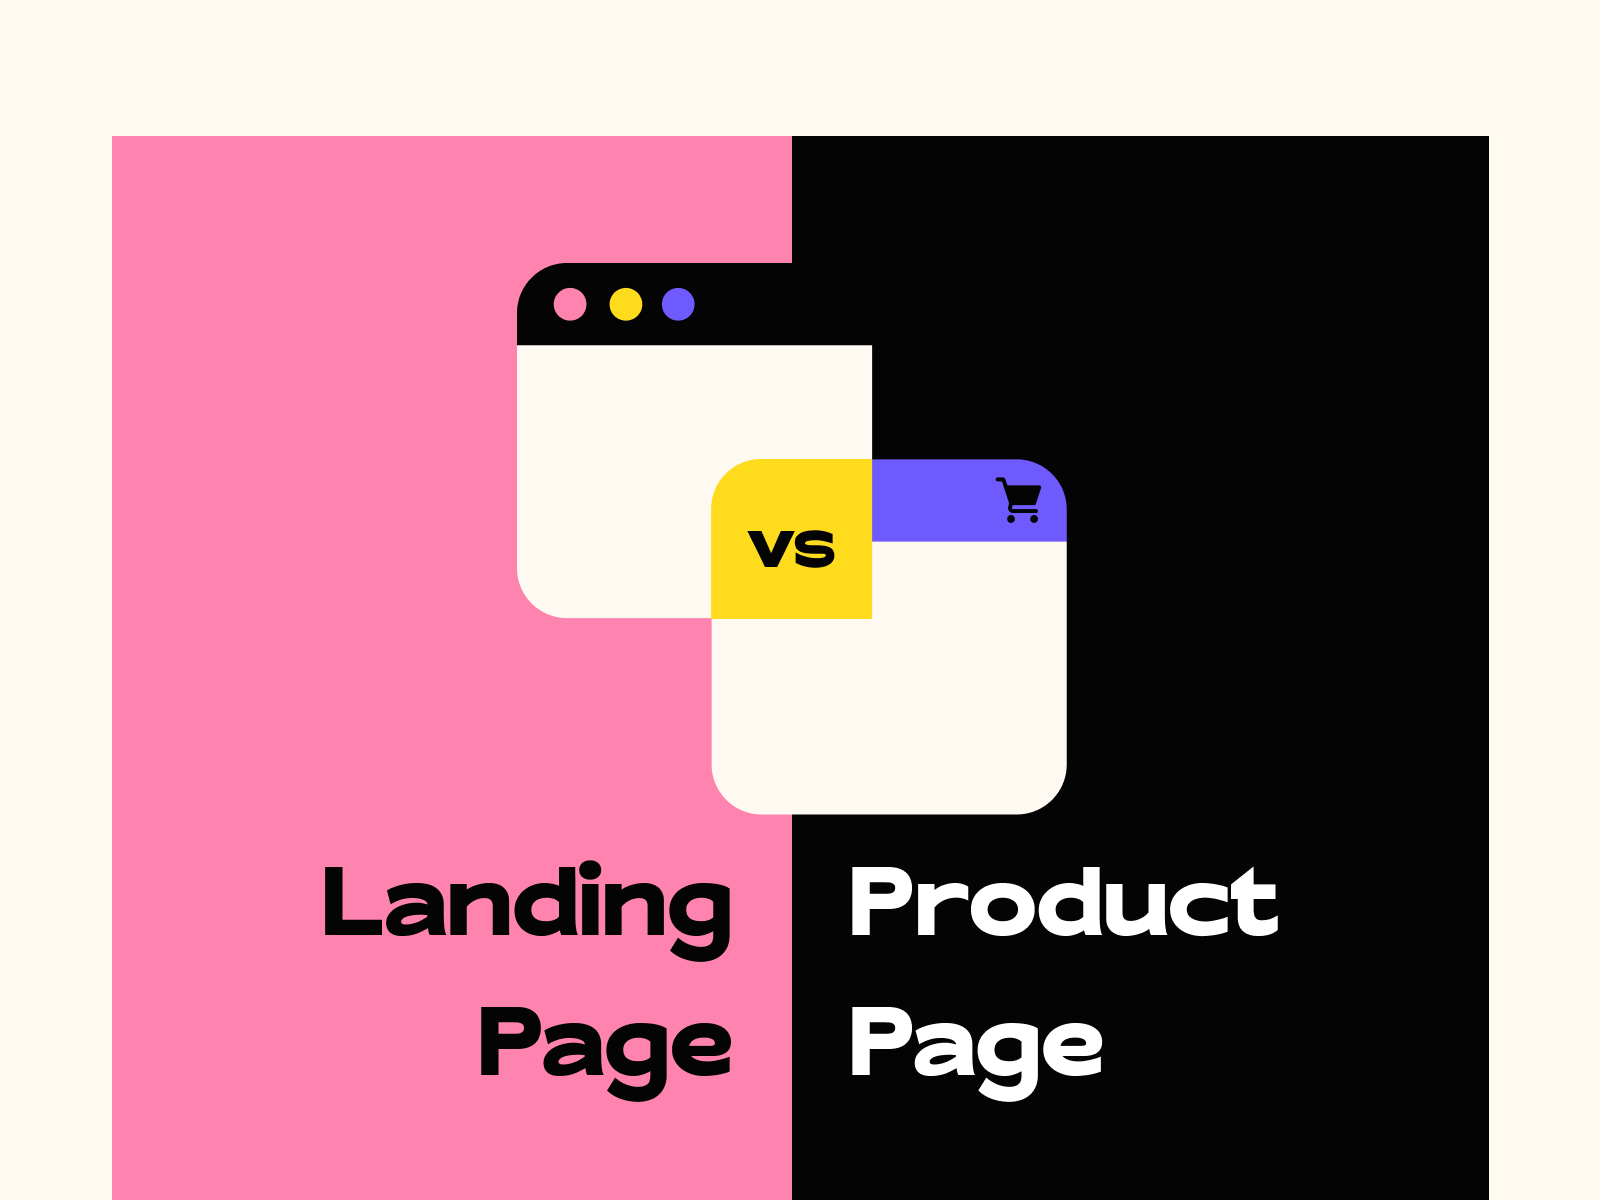 landing page vs product page